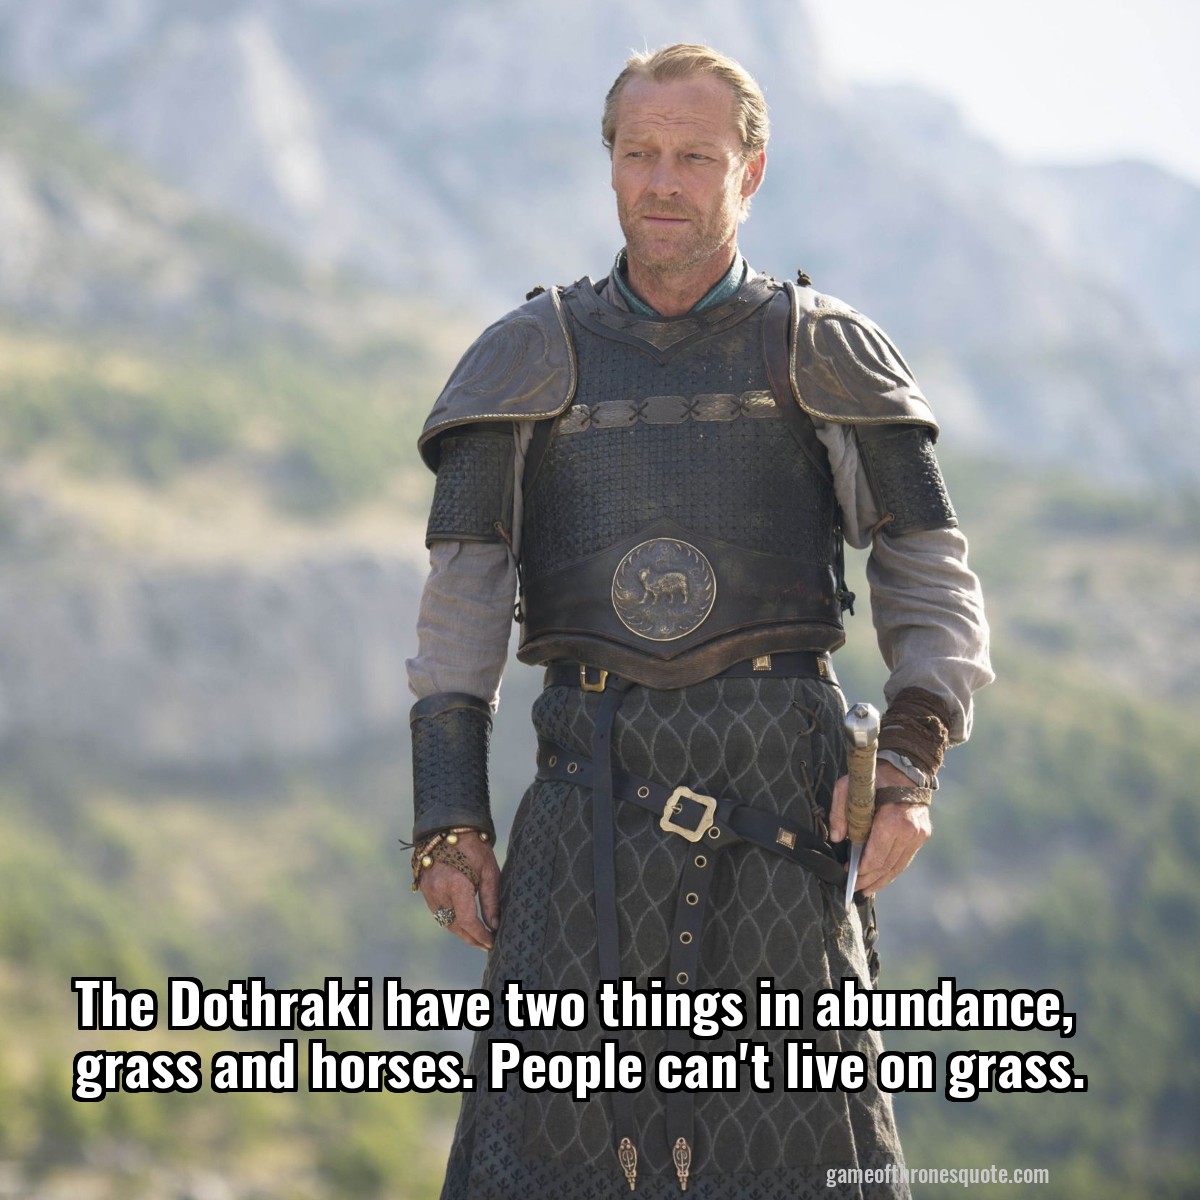 The Dothraki have two things in abundance, grass and horses. People can't live on grass.